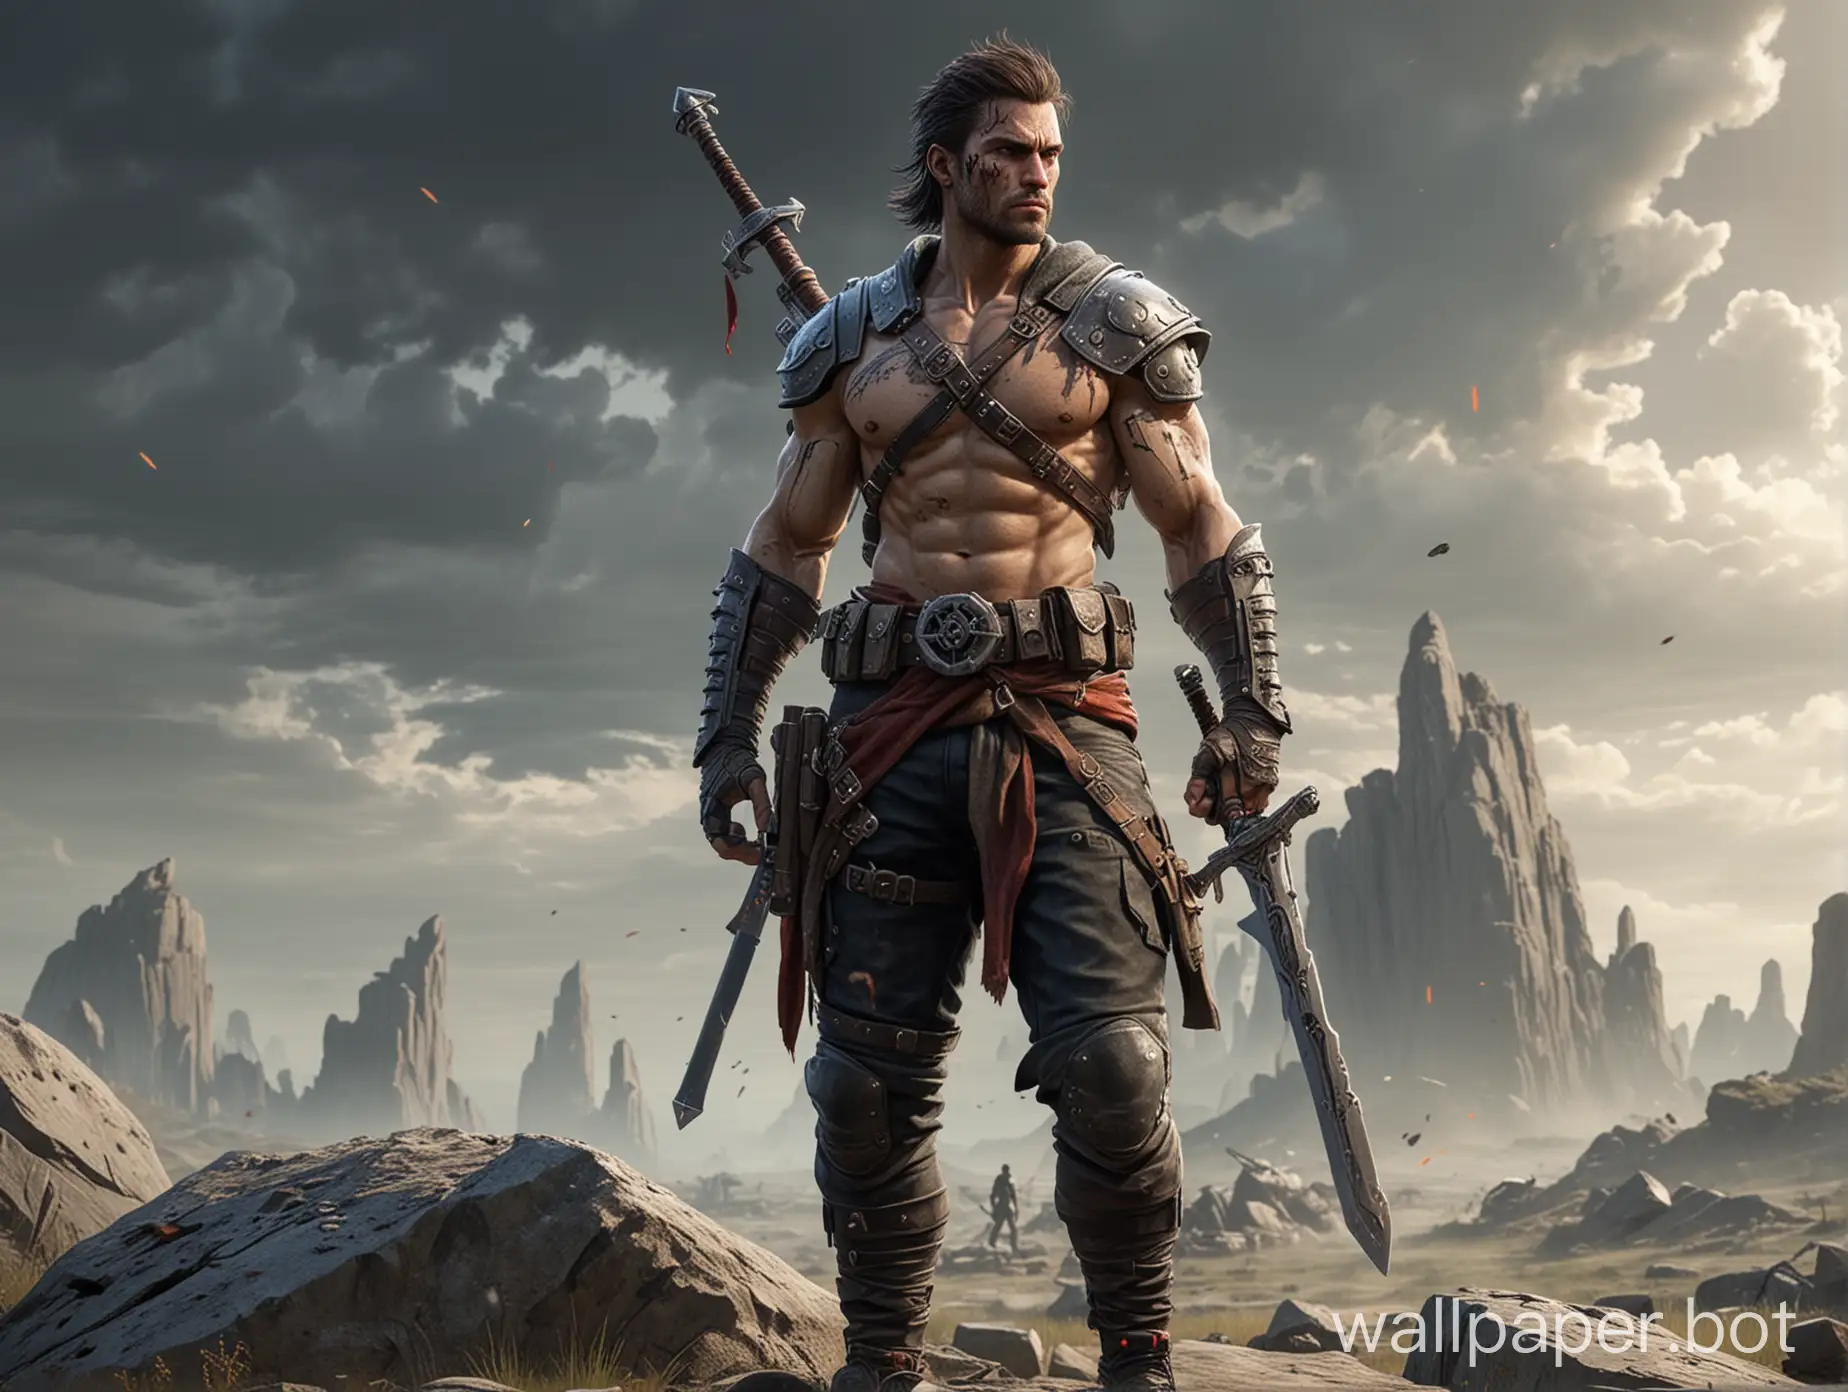 Make a character who is a biker and a gamer which has a small scar on his face and has a fit body. He holds a sword in his right hand and a gun in his left hand. He is standing on a big rock and looking on a battlefield for war.